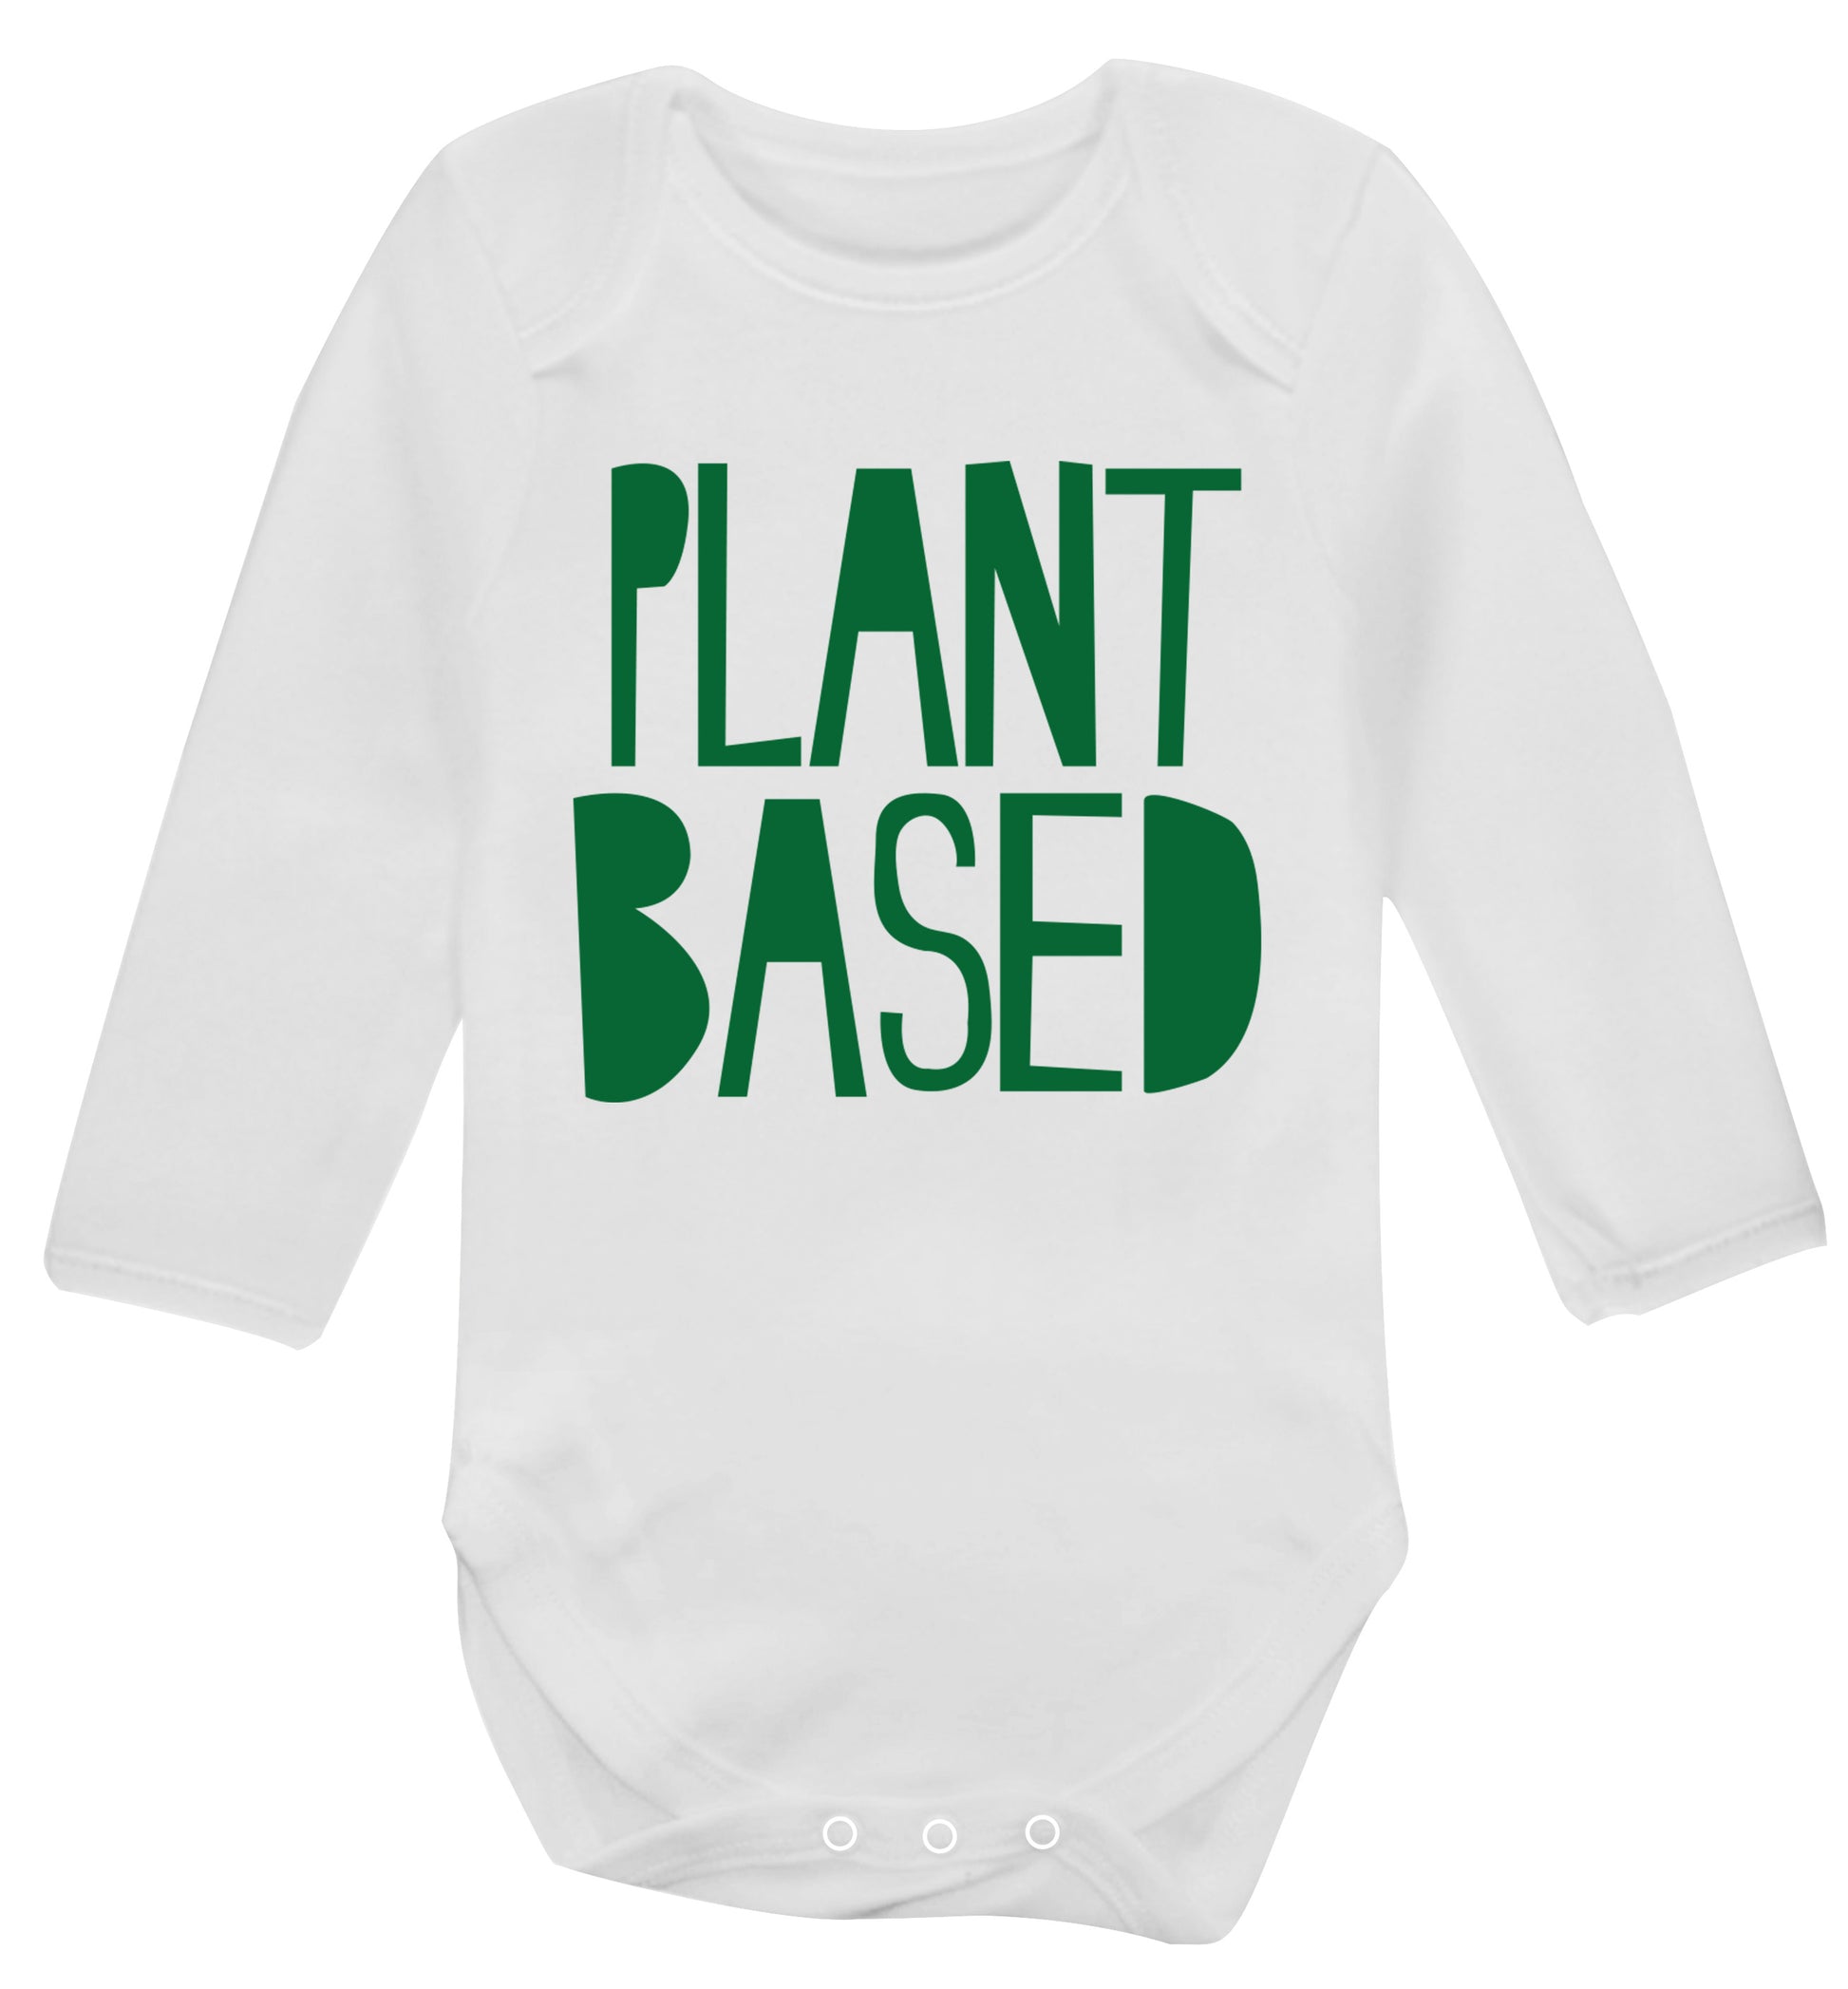 Plant Based Baby Vest long sleeved white 6-12 months